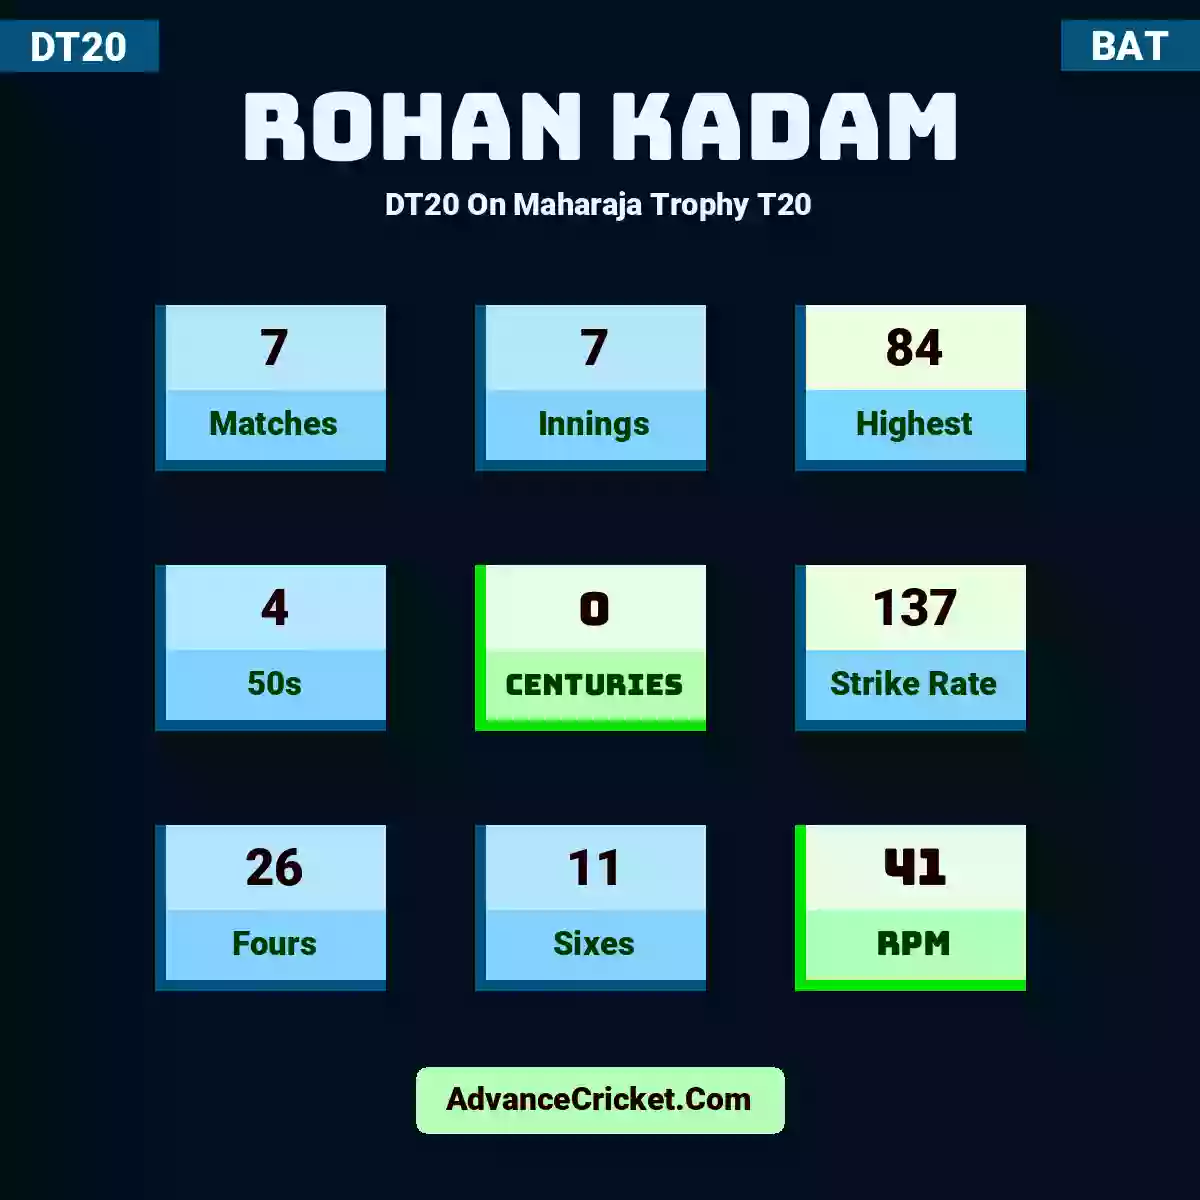 Rohan Kadam DT20  On Maharaja Trophy T20, Rohan Kadam played 7 matches, scored 84 runs as highest, 4 half-centuries, and 0 centuries, with a strike rate of 137. R.Kadam hit 26 fours and 11 sixes, with an RPM of 41.